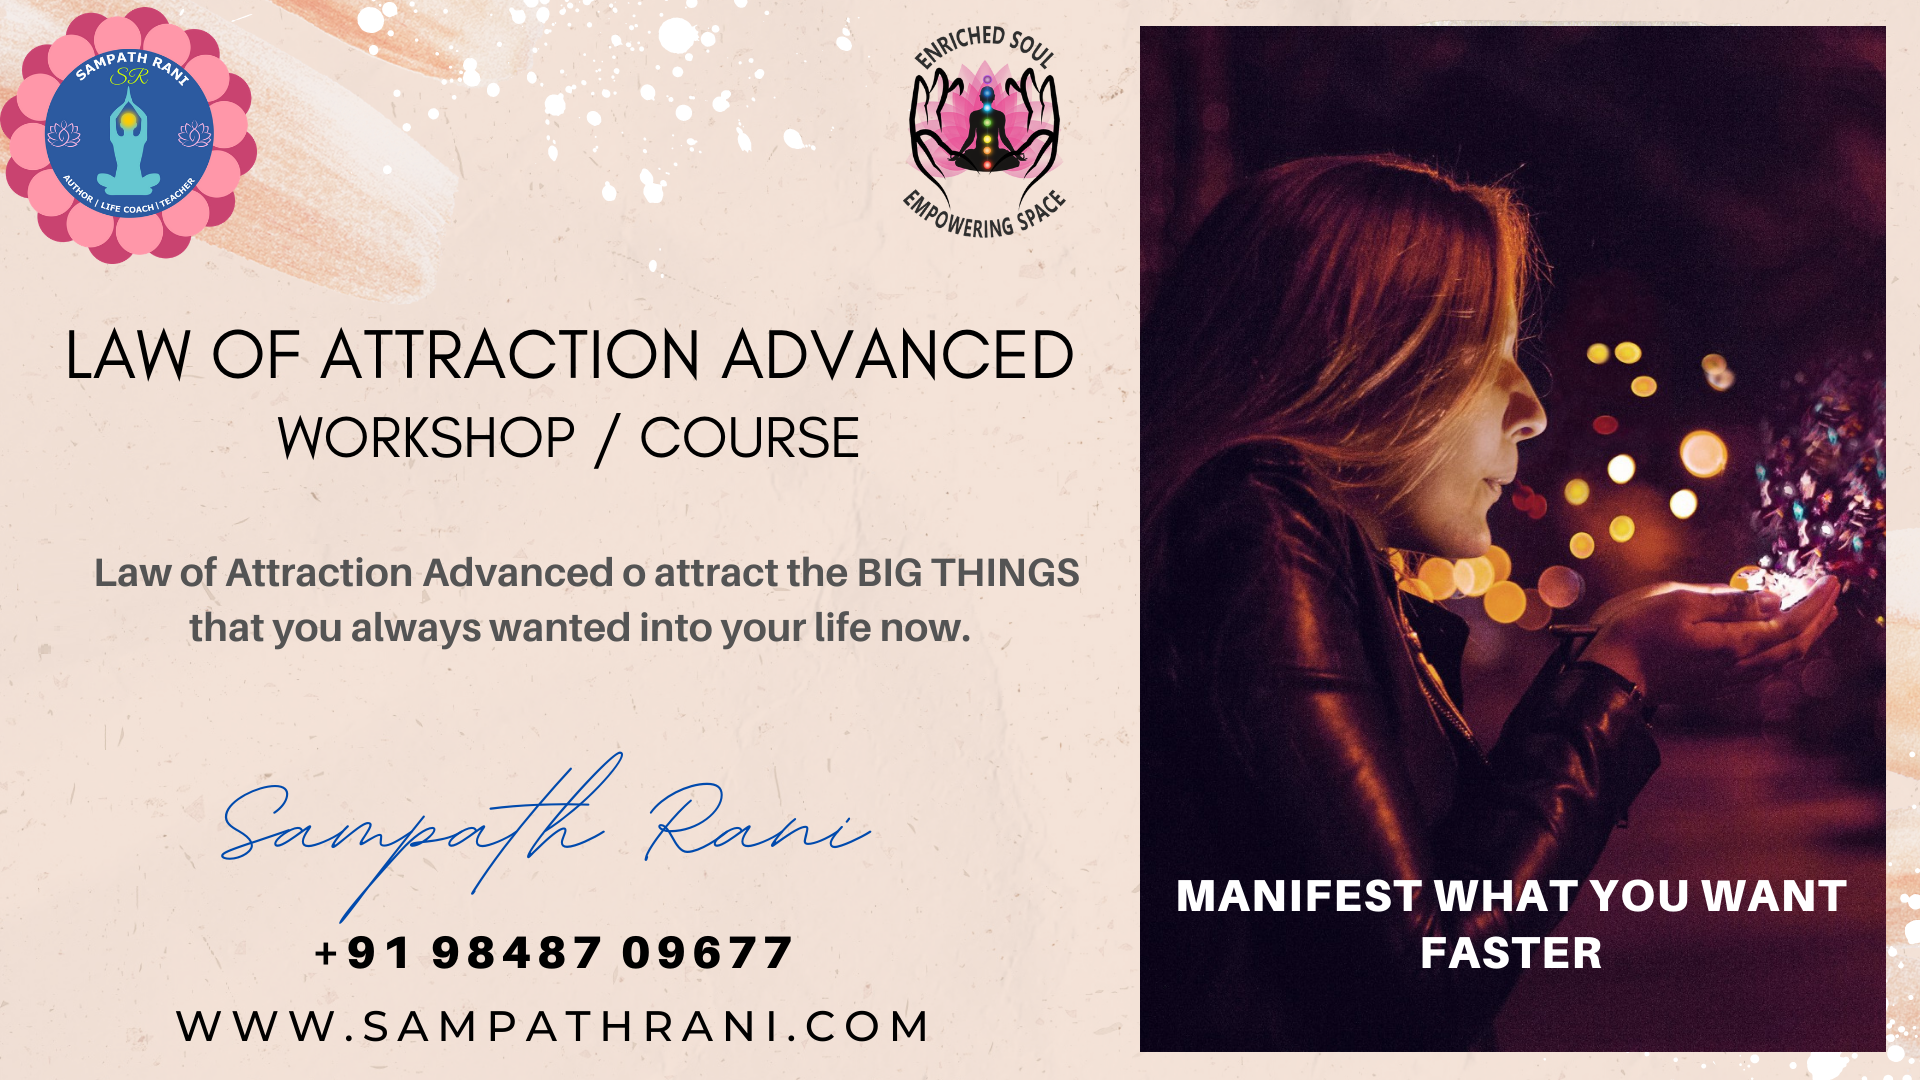 Law of Attraction Advanced Workshop, Course - by Sampath Rani - Surat